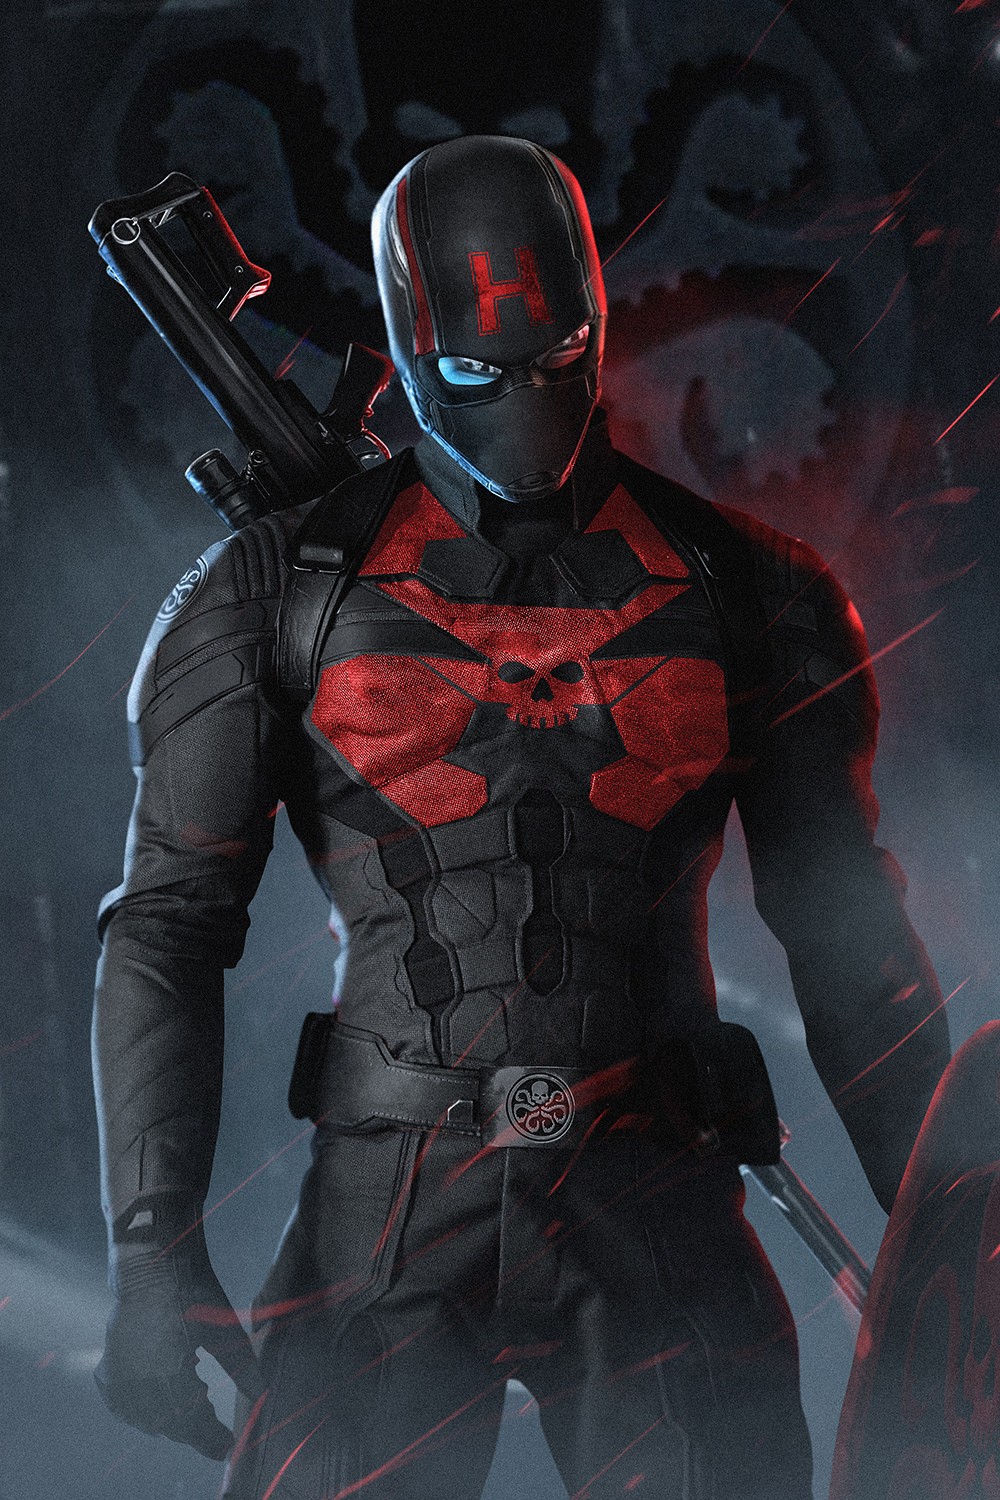 Captain-America-Hydra-Costume-and-Mask-by-BossLogic